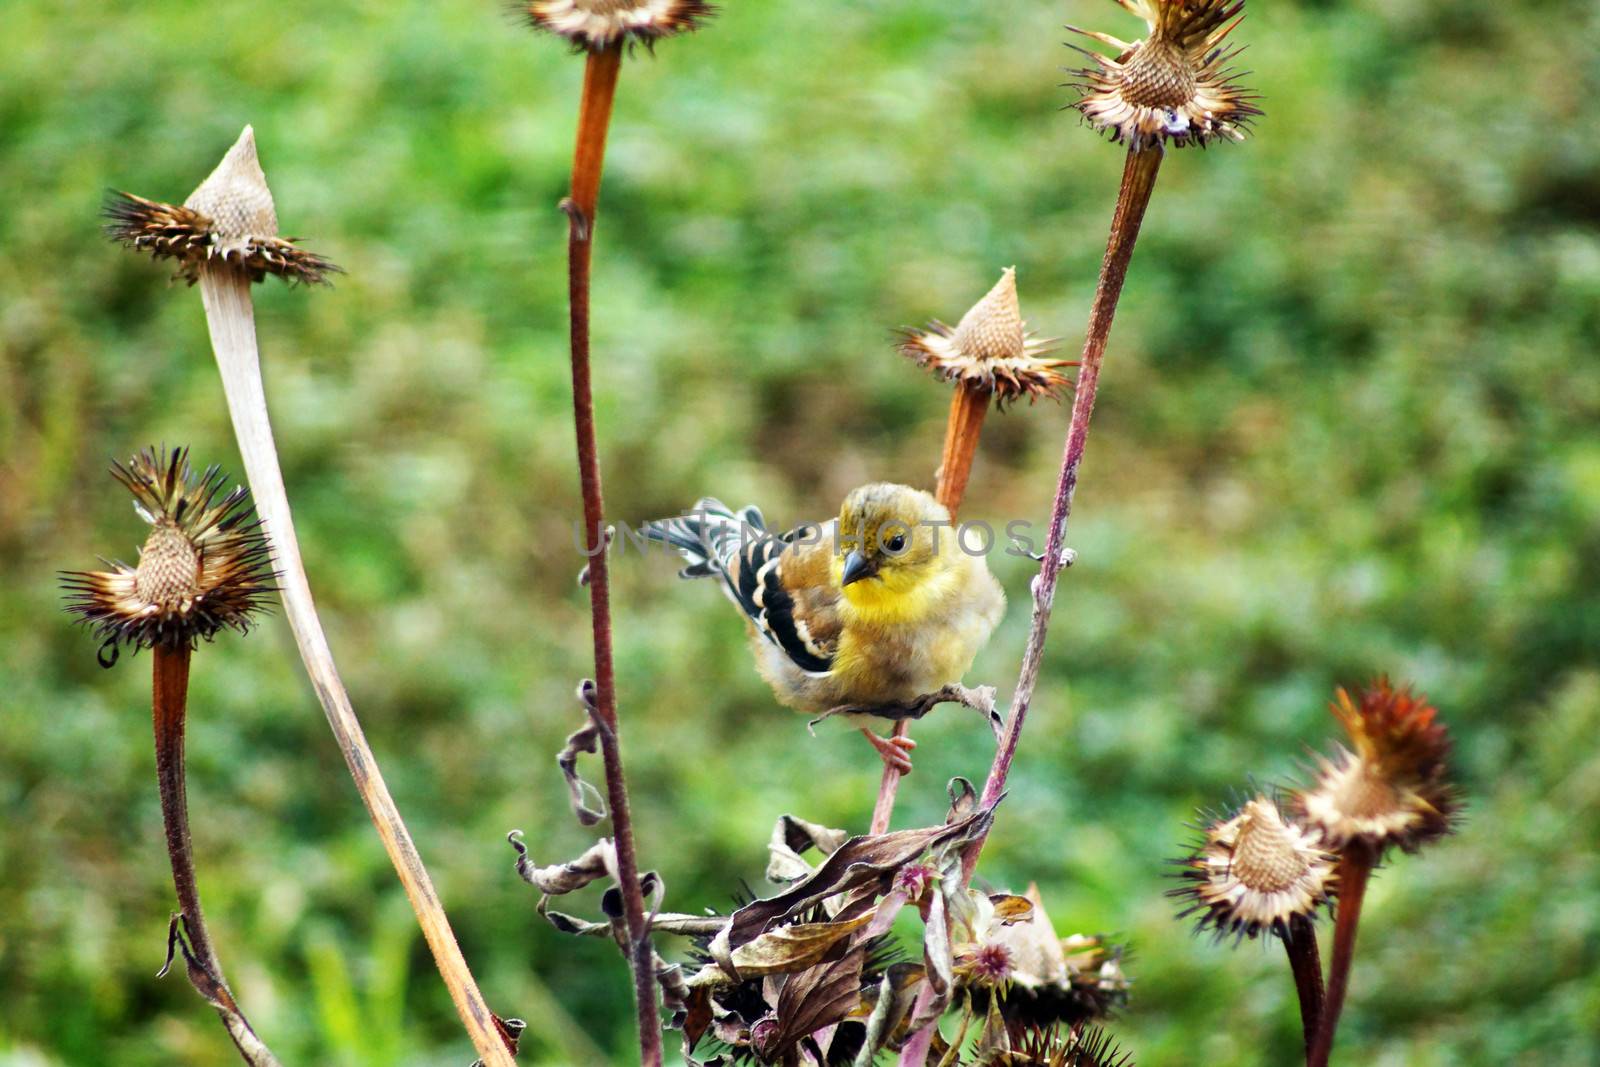 Yellow bird, American goldfinch, Carduelis tristis, in winter plumage eating cone flower seeds